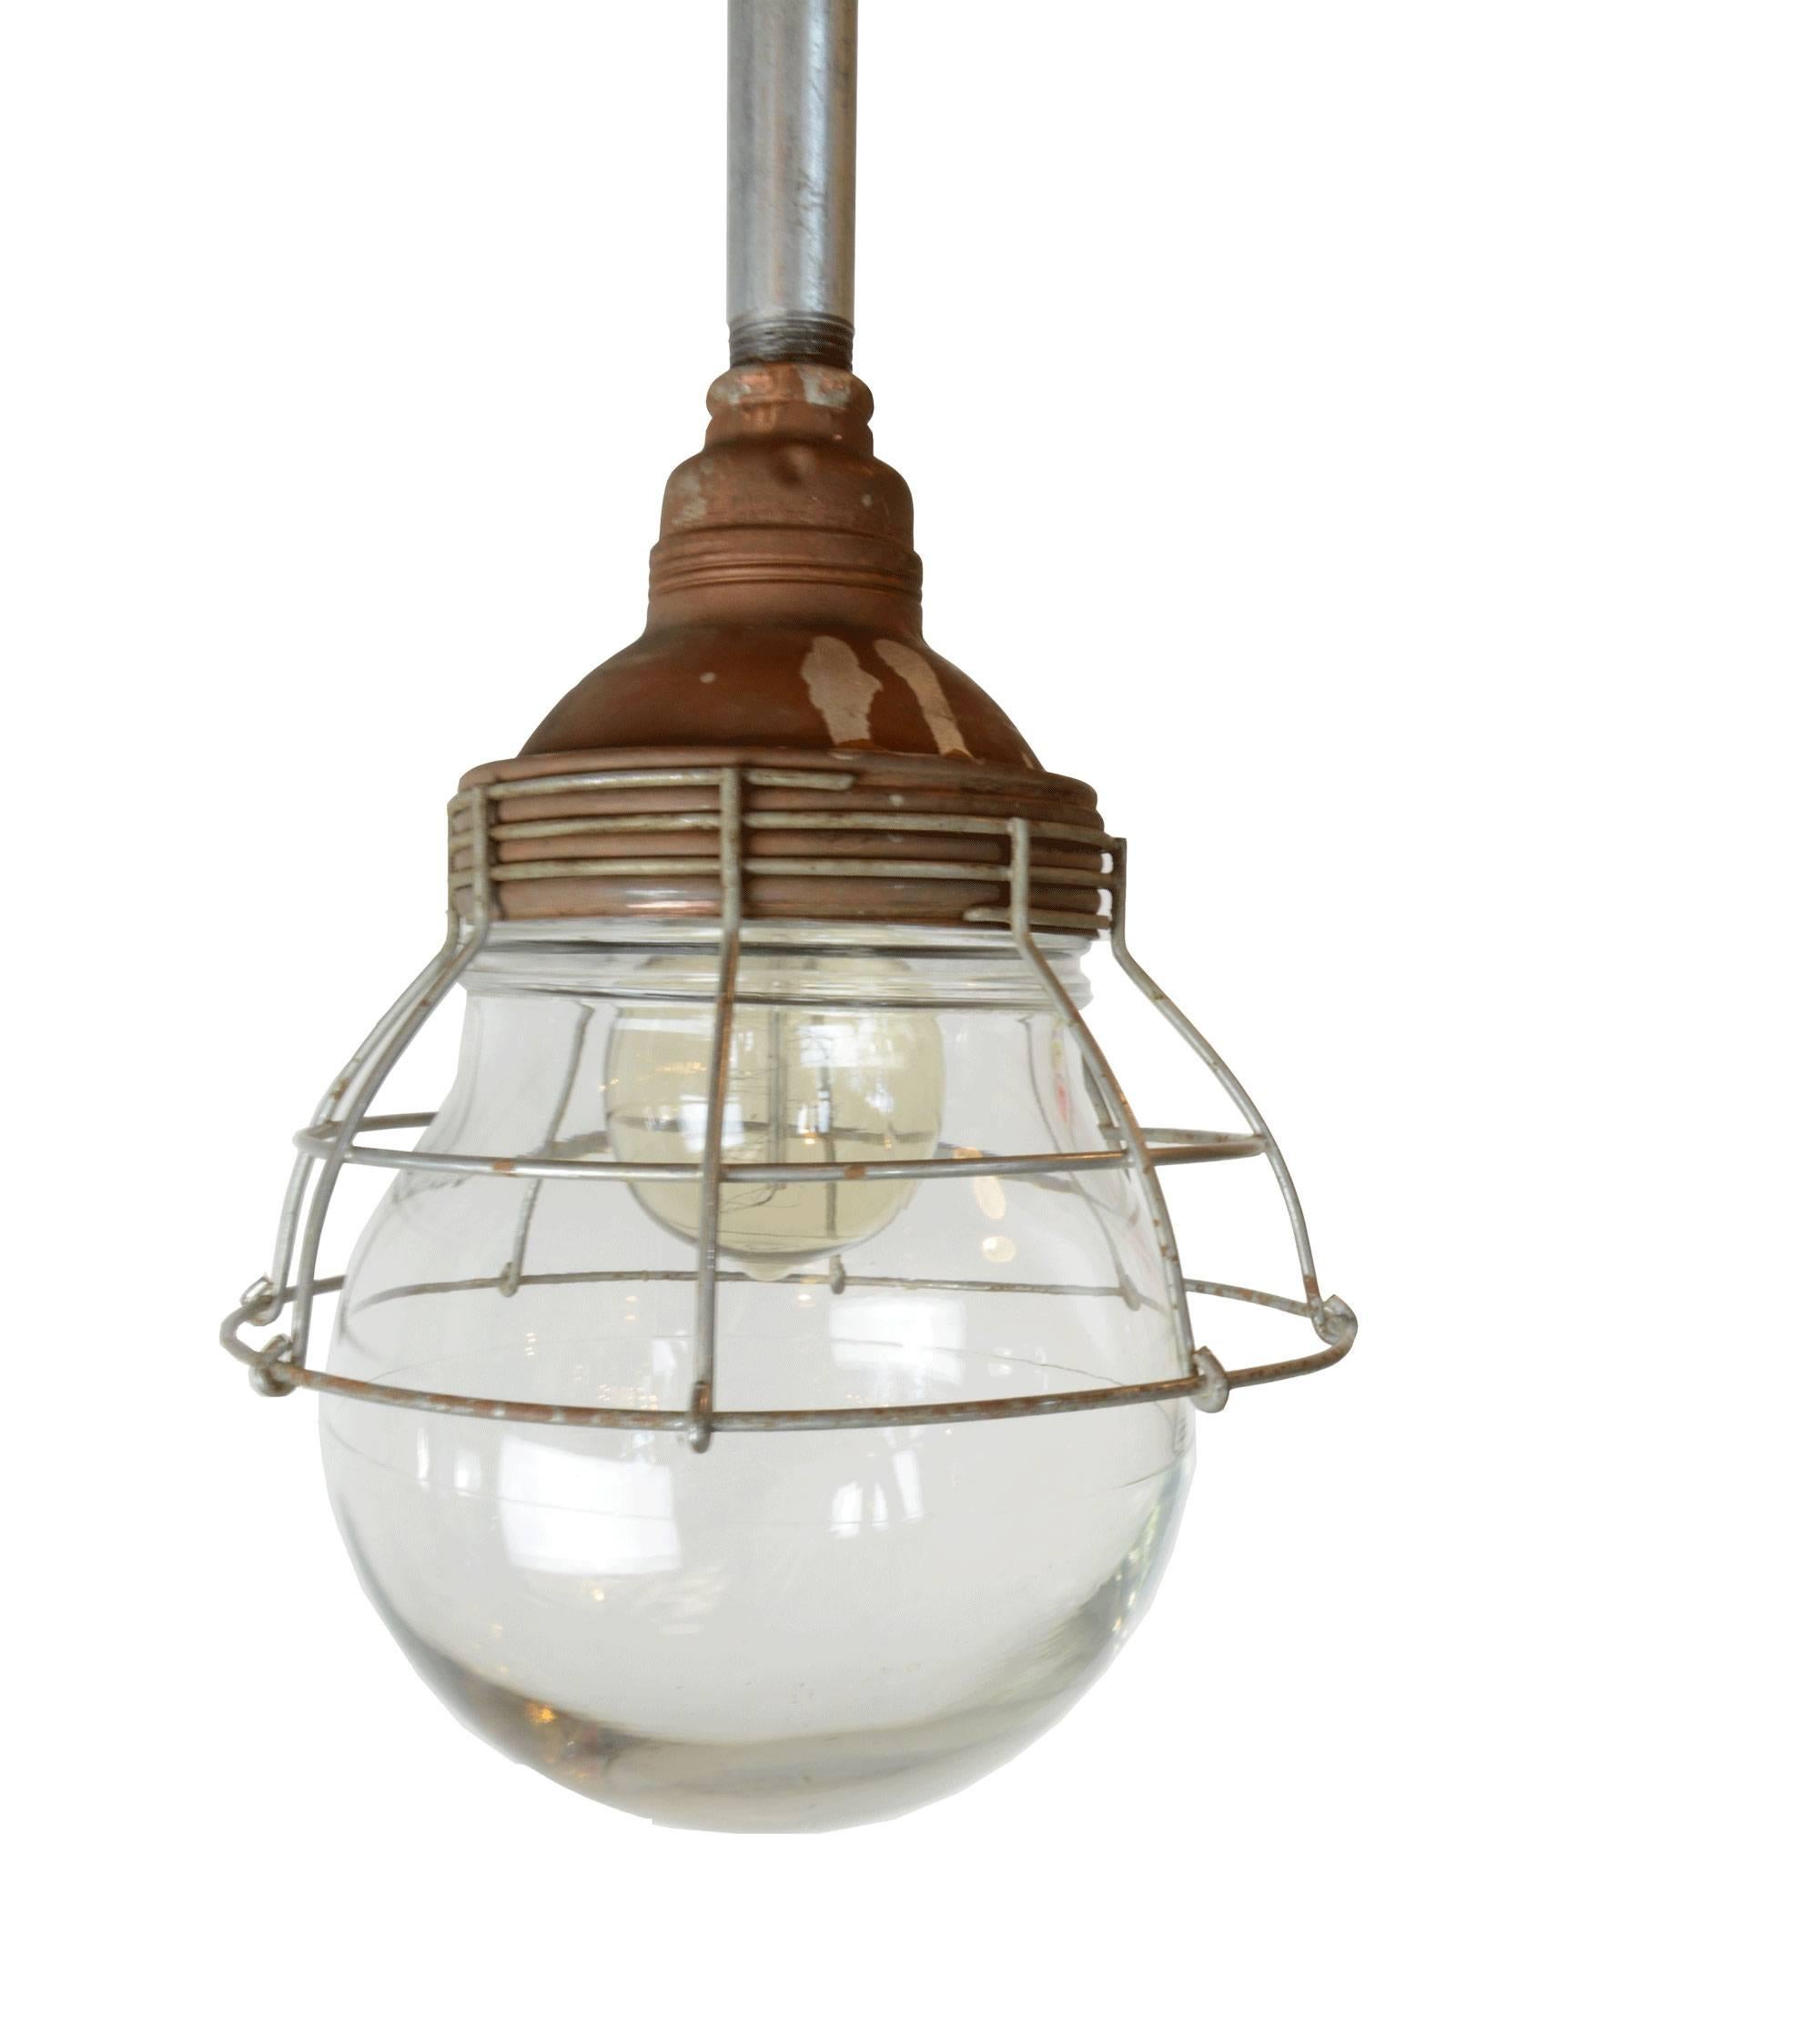 Unique Industrial copper pendant from the Benjamin Electric Manufacturing Company. It features a large, round glass shade and caged overlay. Available in two variants: tall and short. 

Finish: Original
One medium socket
Measures: Short: 19